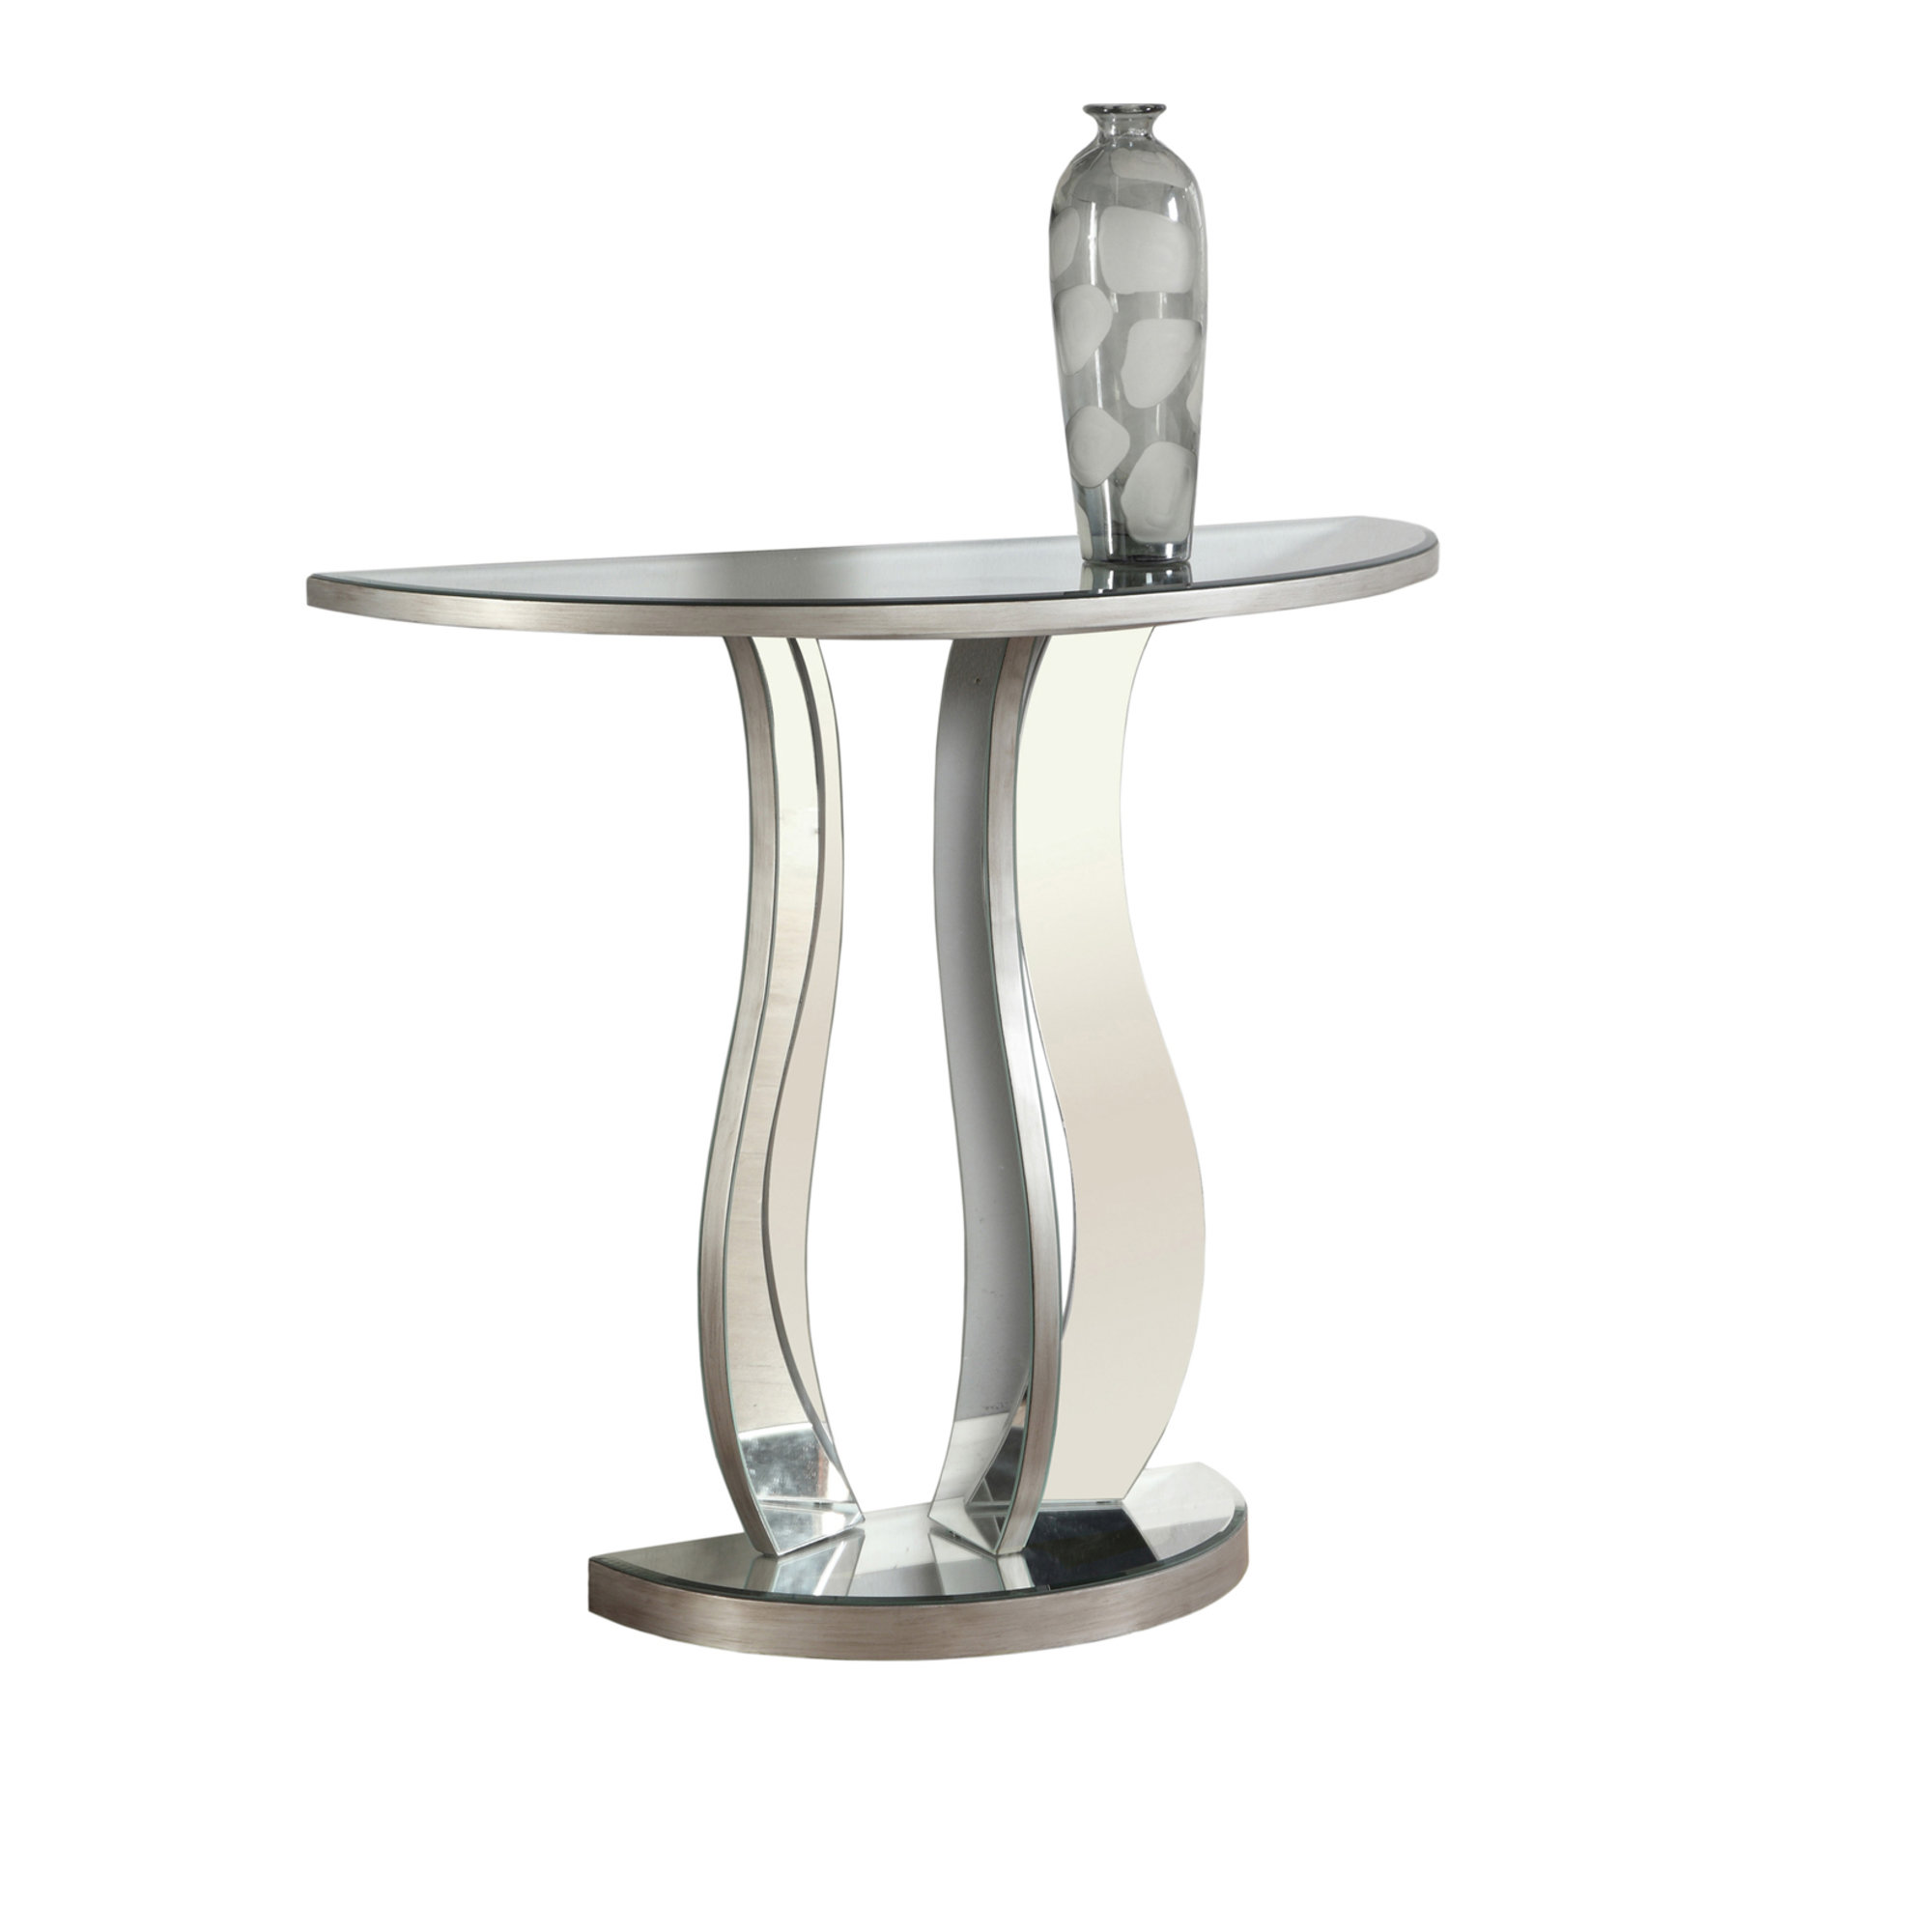 14.5" x 36" x 32" Brushed SilverMirror Accent Table